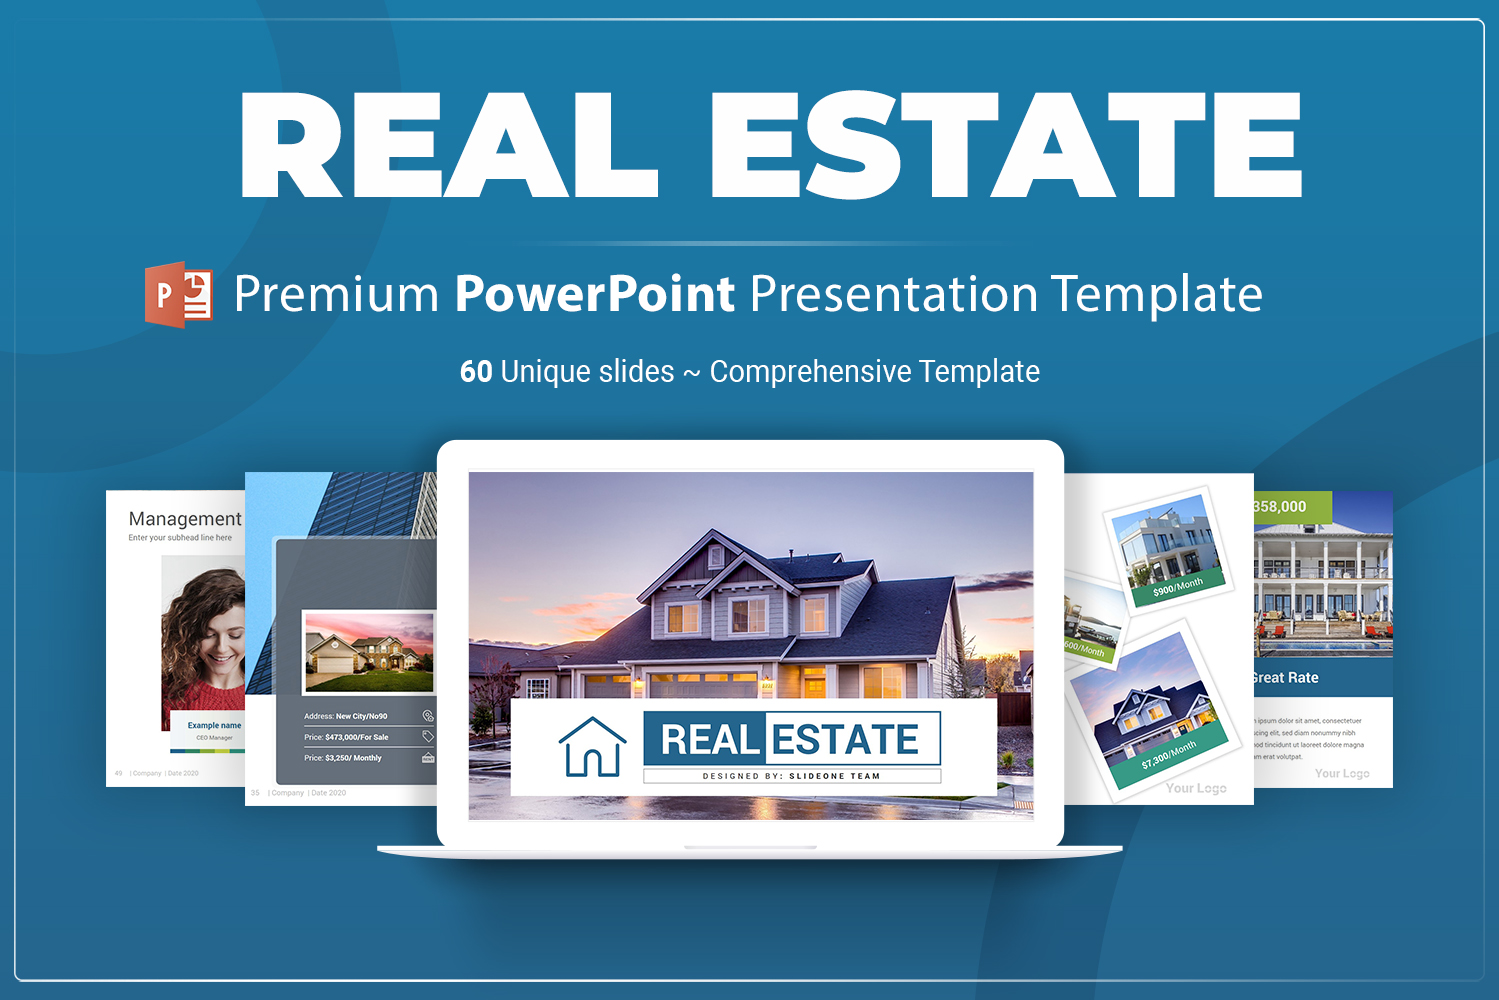 Real Estate PowerPoint Business Presentation Template